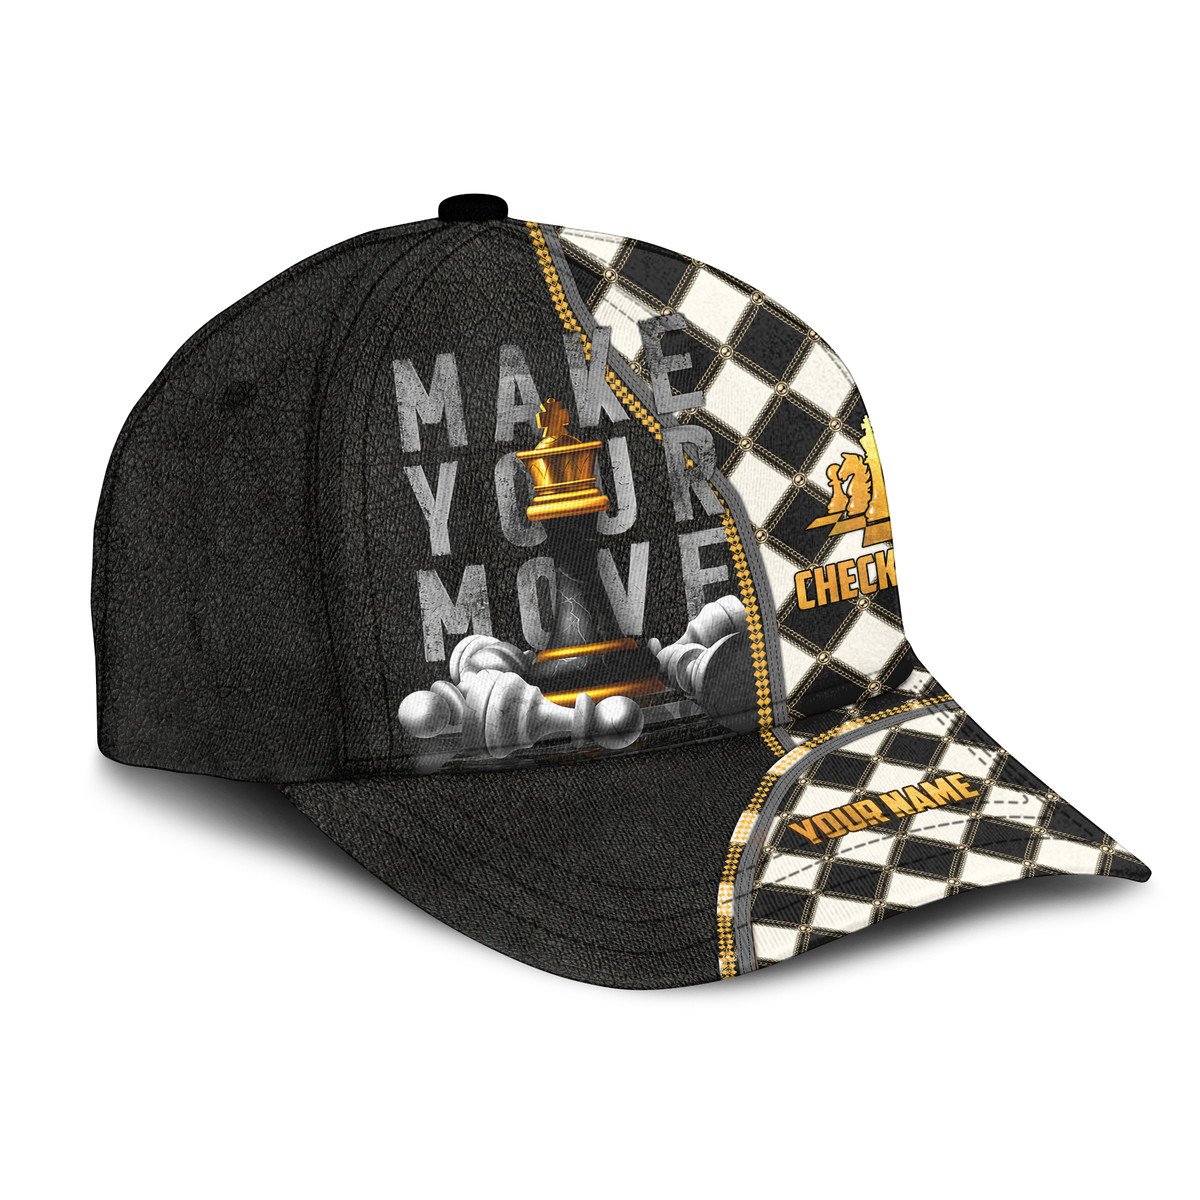 Personalized Name Chess Classic Cap/ Make Your Move Checkmate Cap Chess/ Hat for Chess Player